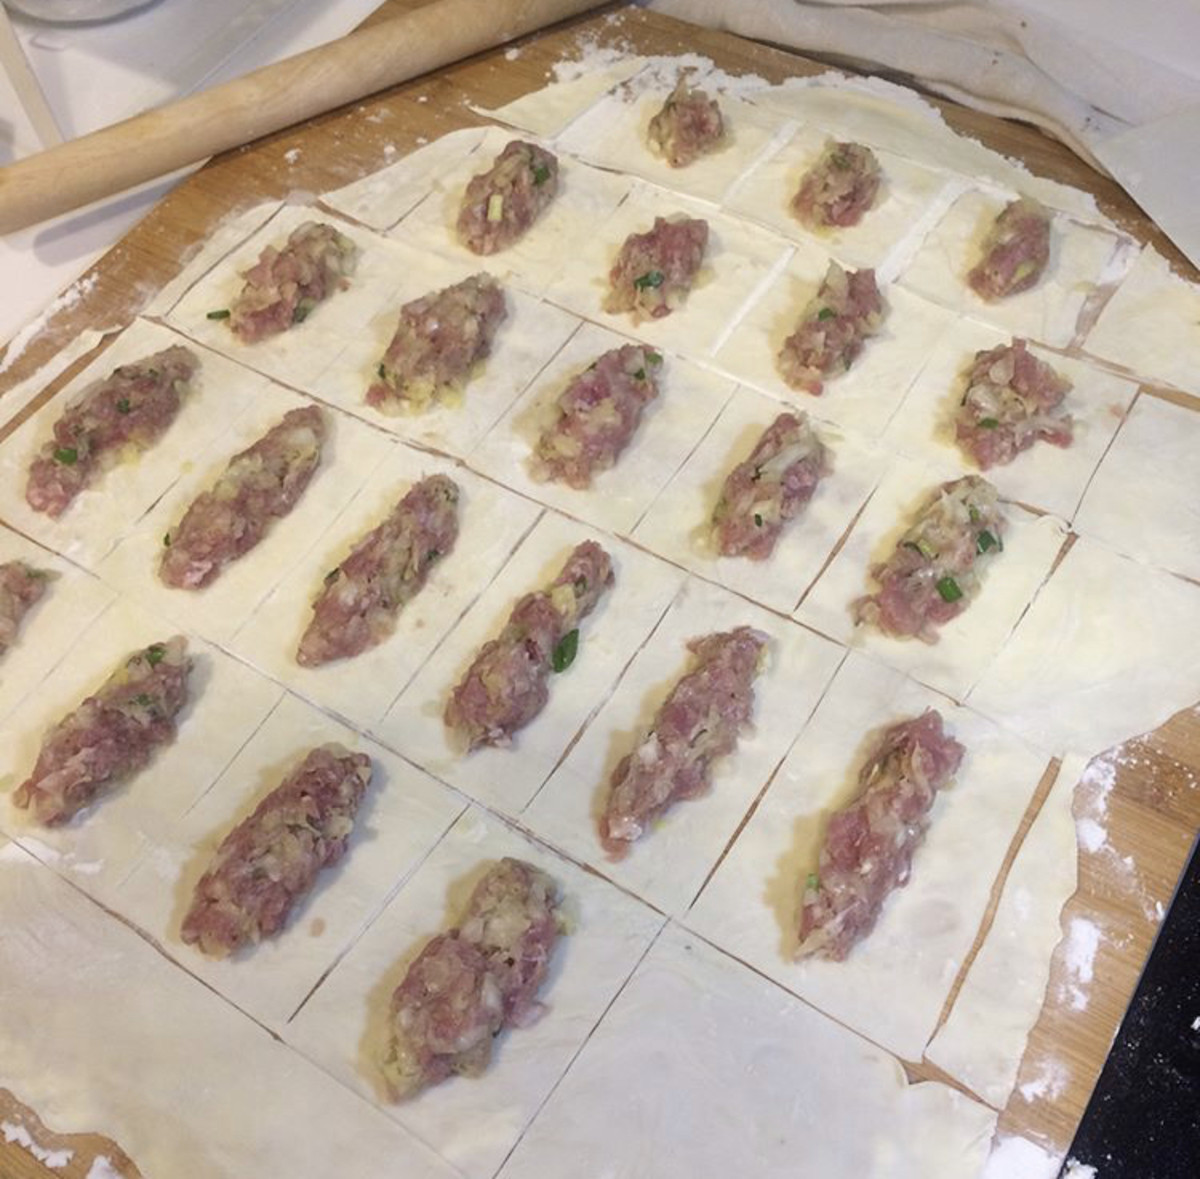 Use an assembly line to make potstickers efficiently